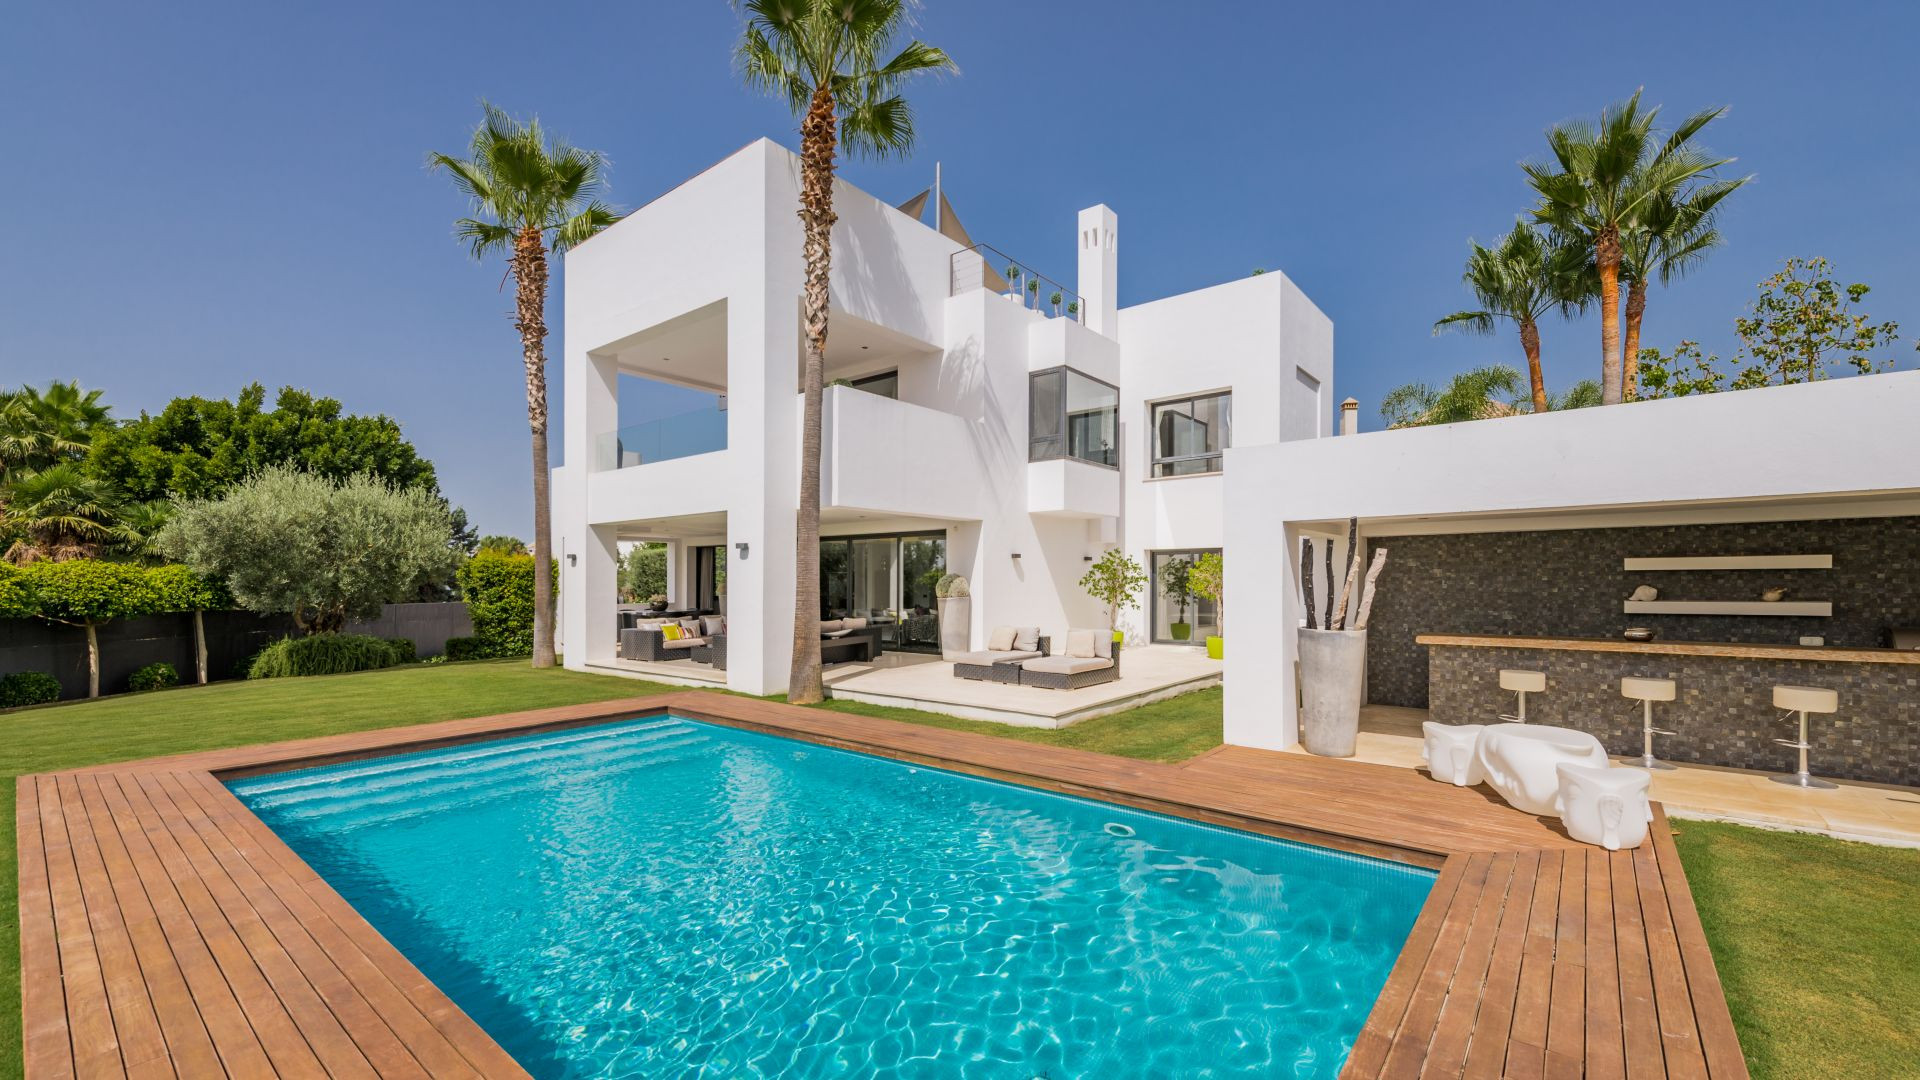 Contemporary style villa situated within an exclusive gated community